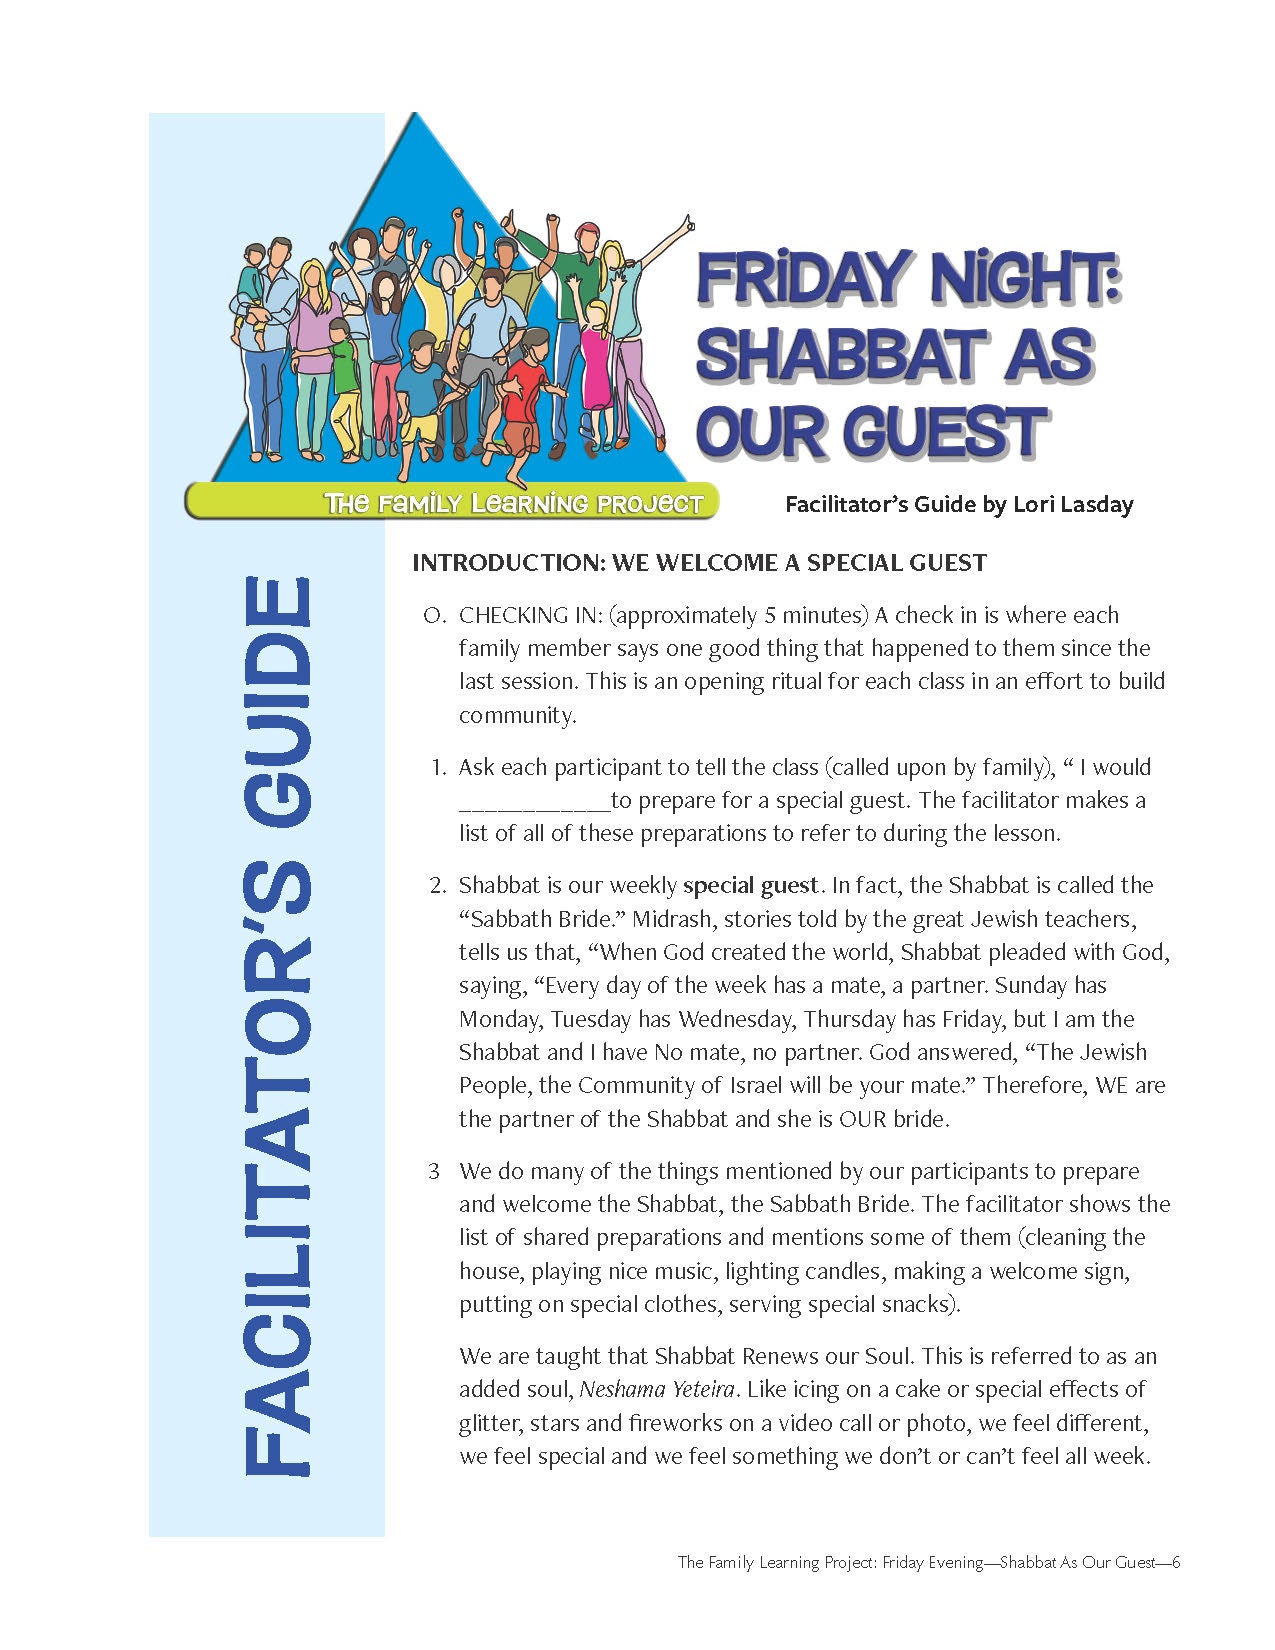 Family Learning: Friday Evening—Shabbat As Our Guest